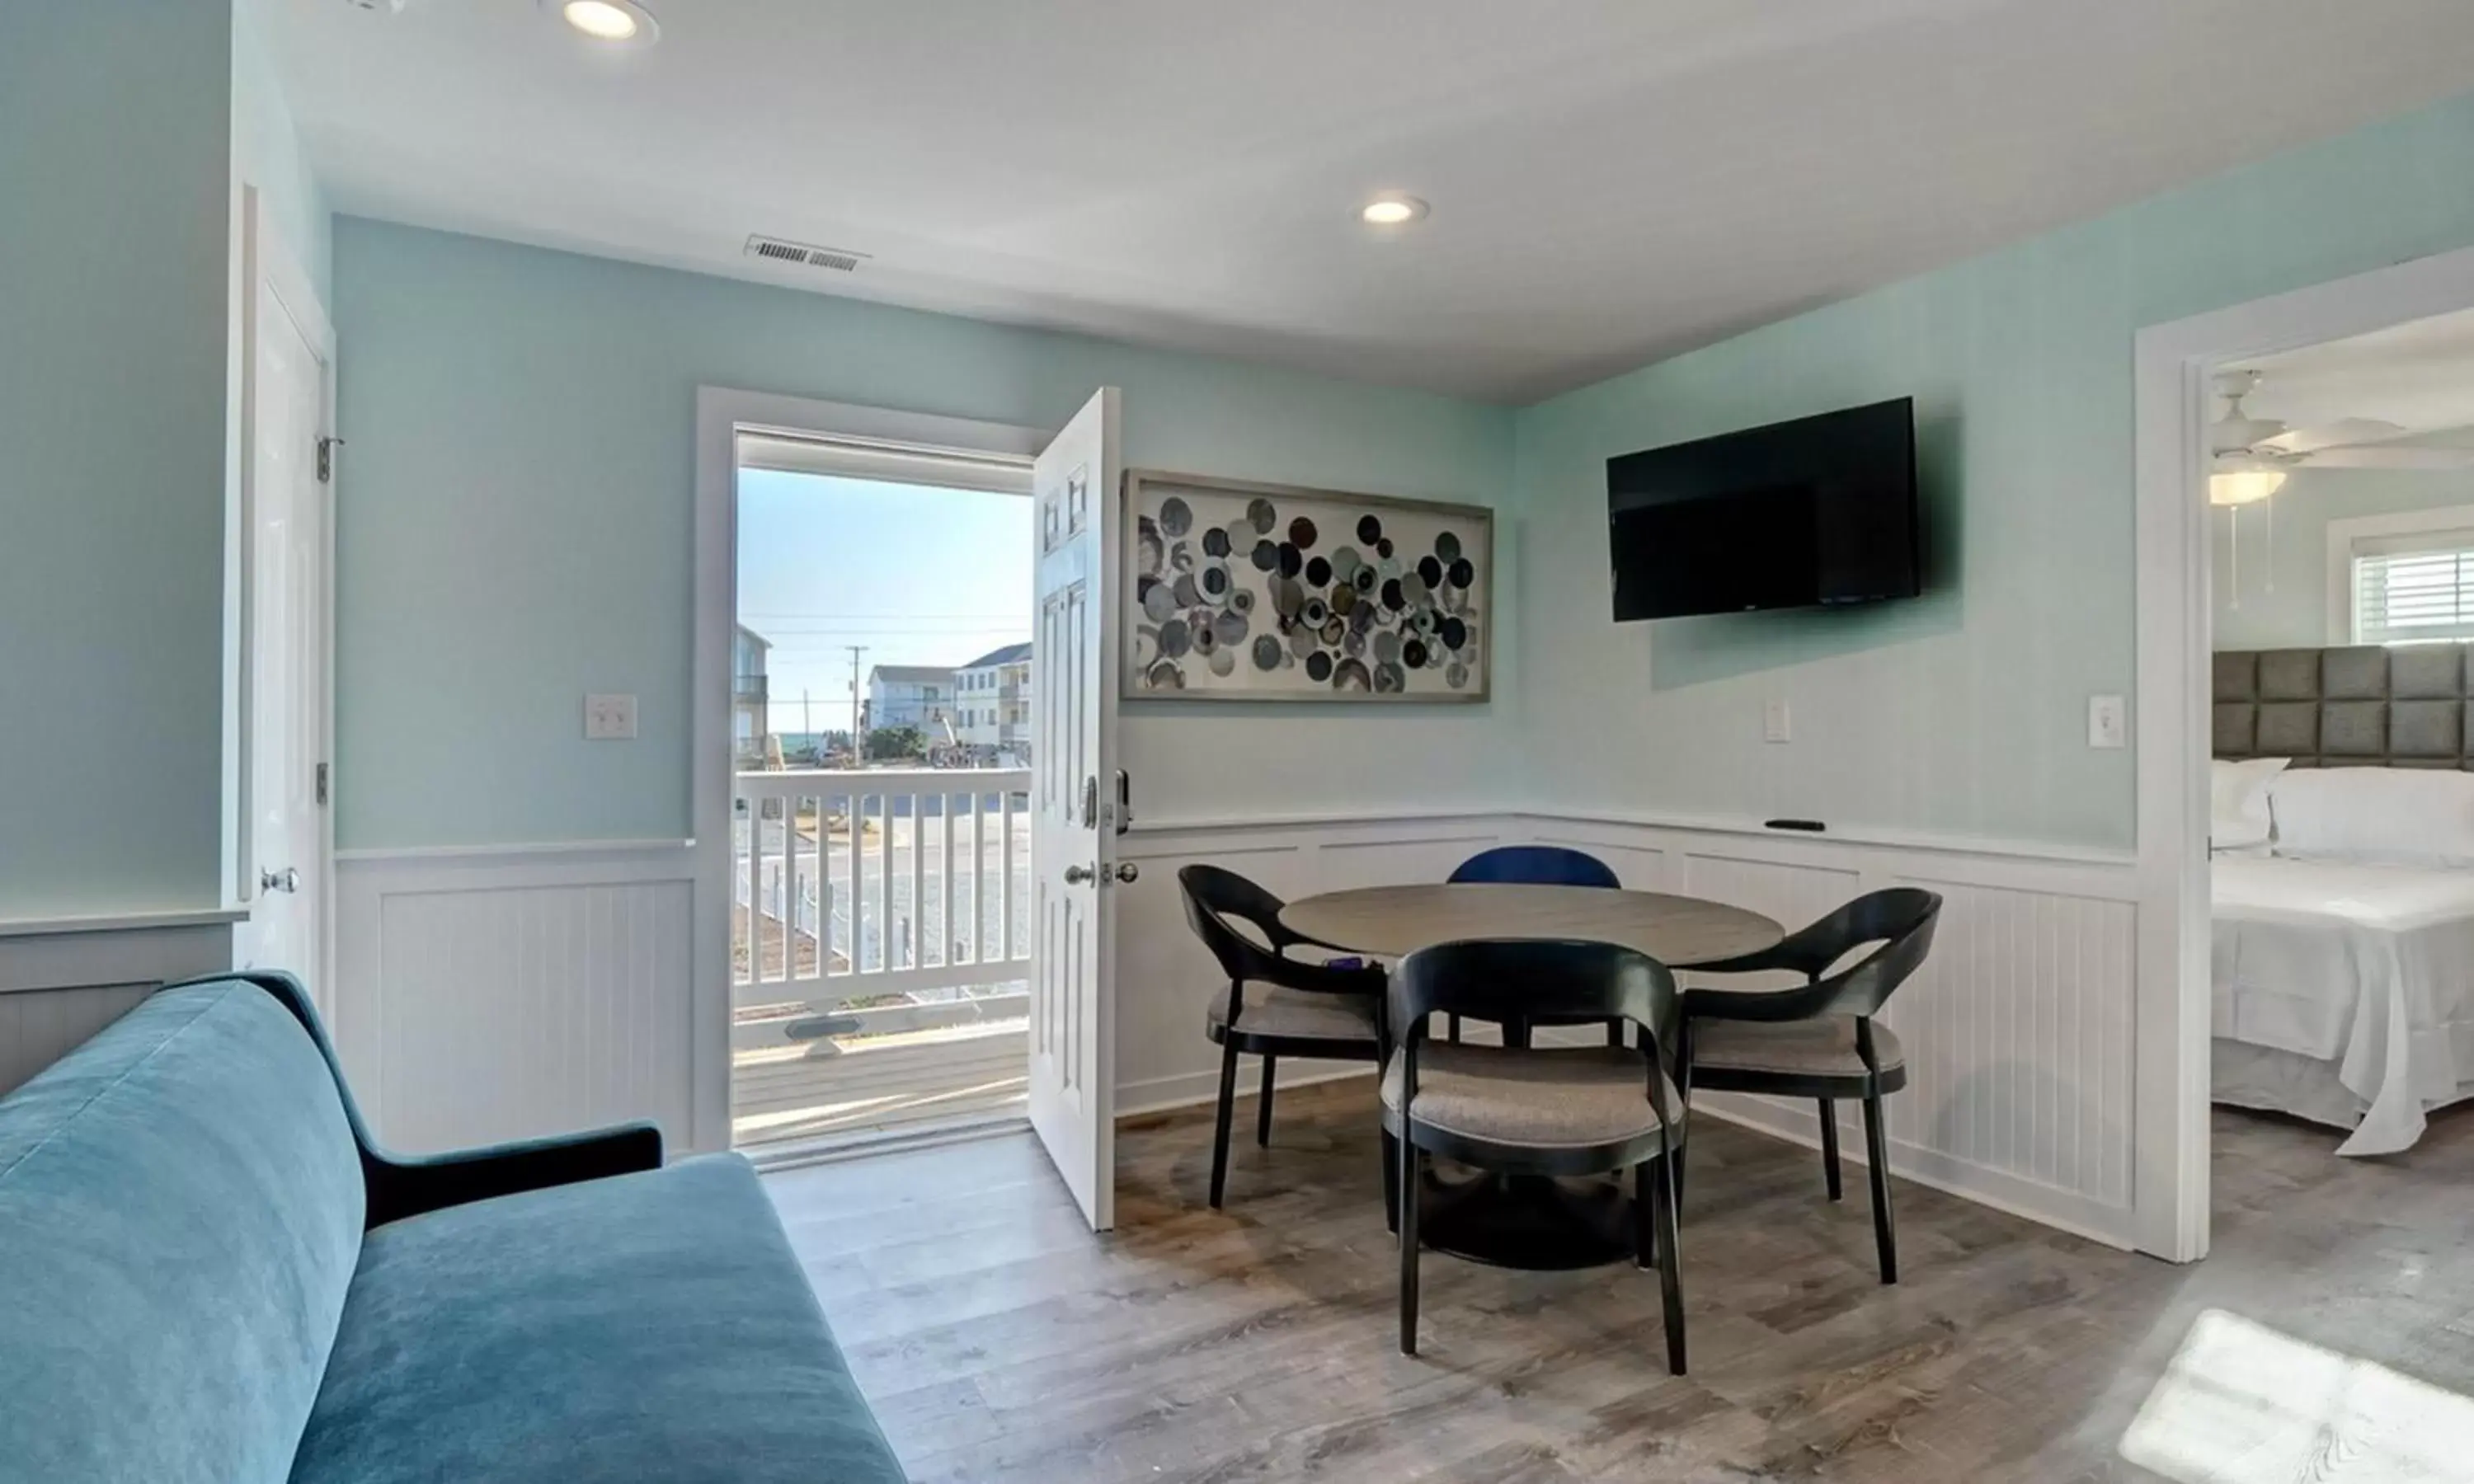 Dining Area in Loggerhead Inn and Suites by Carolina Retreats